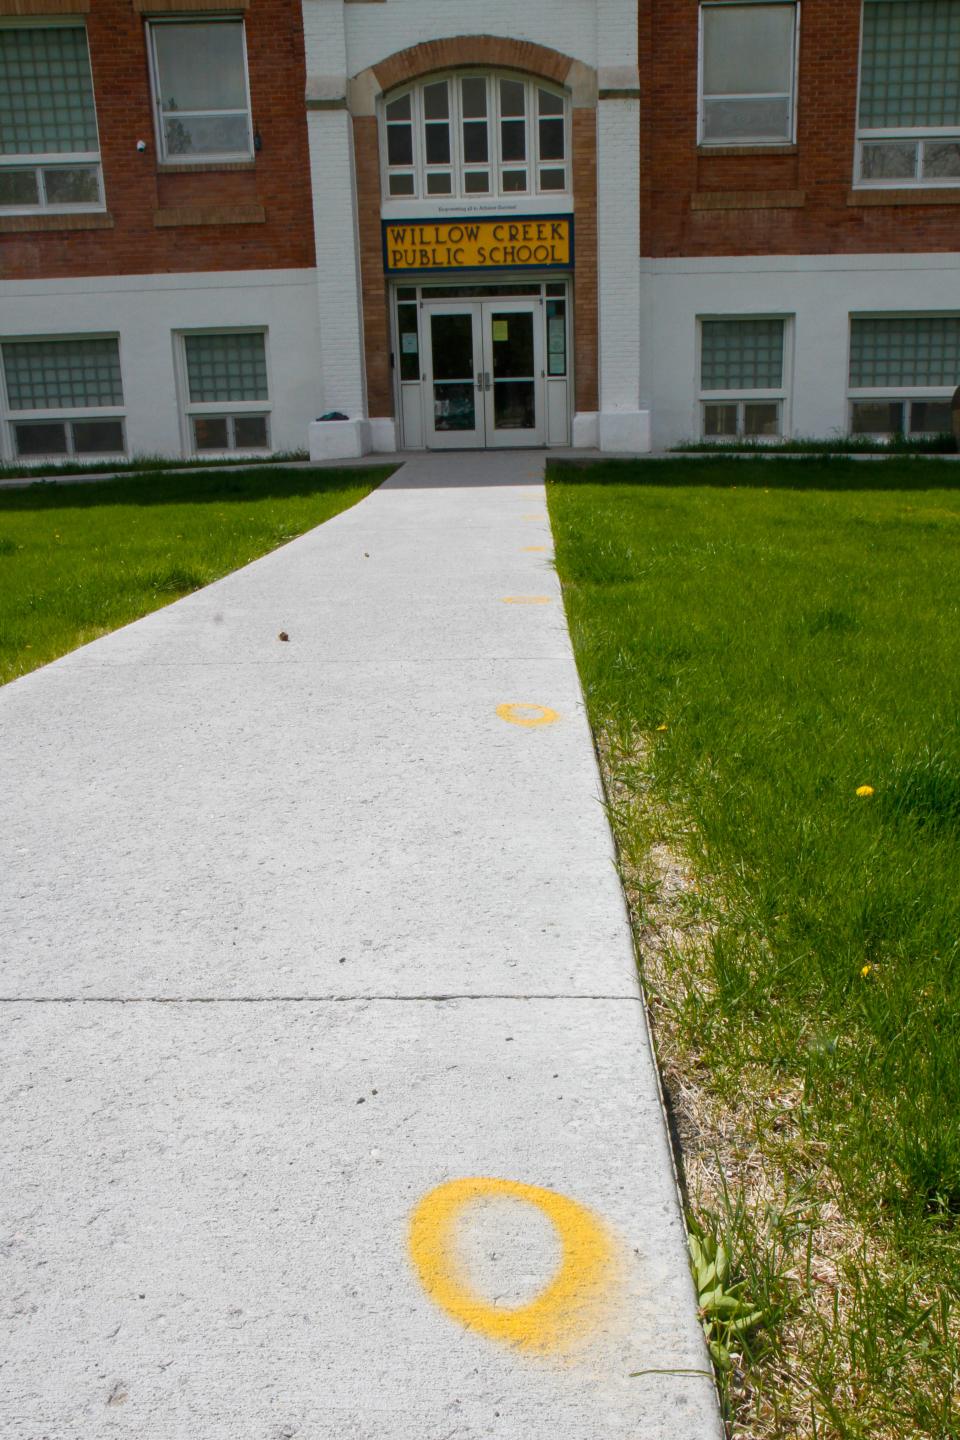 Willow Creek School staff spray painted orange circles onto the sidewalk six-feet-apart outside of the school for students to line up on at the end of recess. Students are greeted with hand sanitizer as they enter the building to return to class.